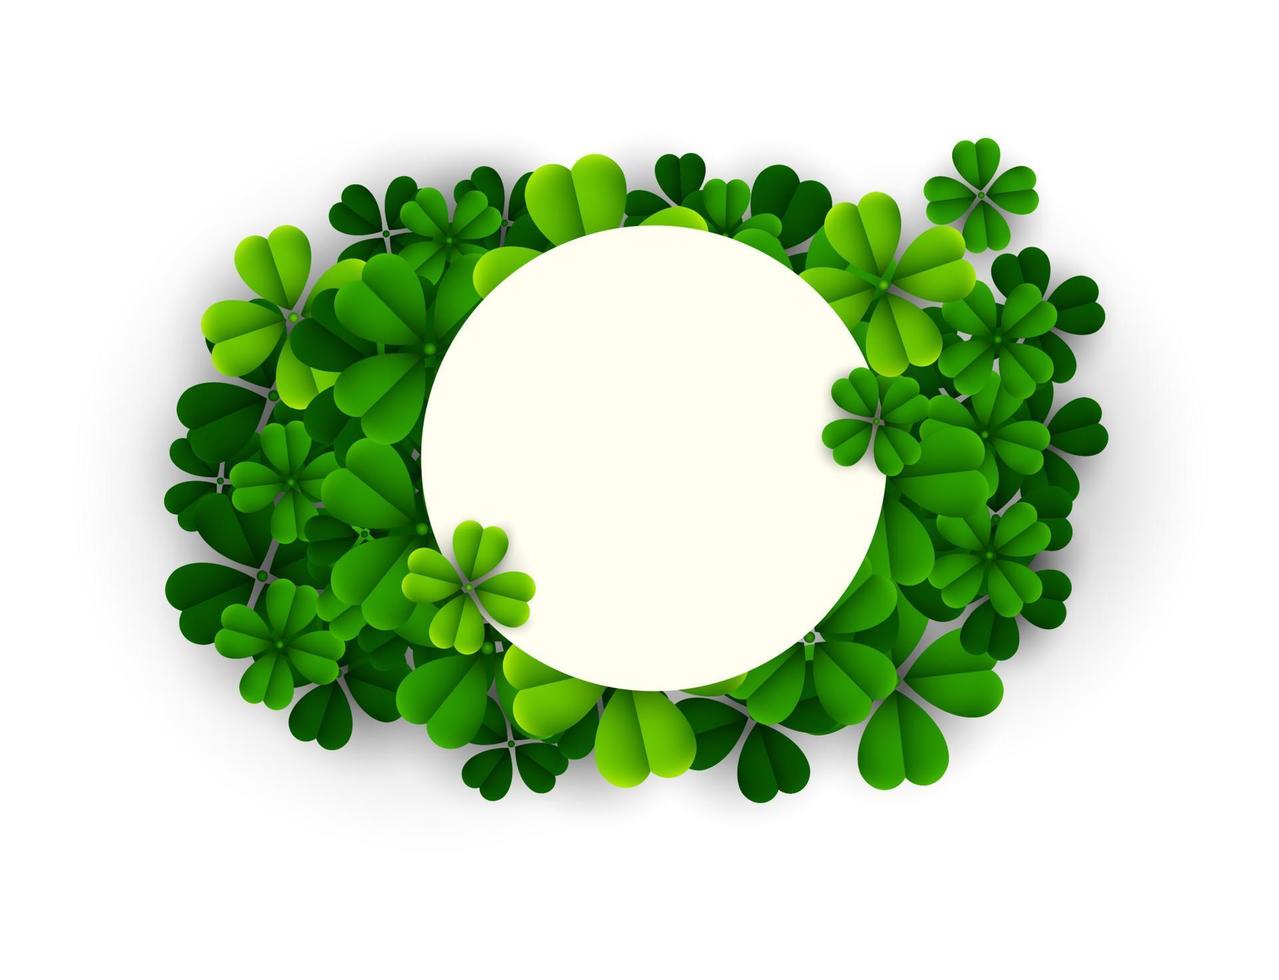 Happy St. Patrick's Day background with clover leaves and round frame vector